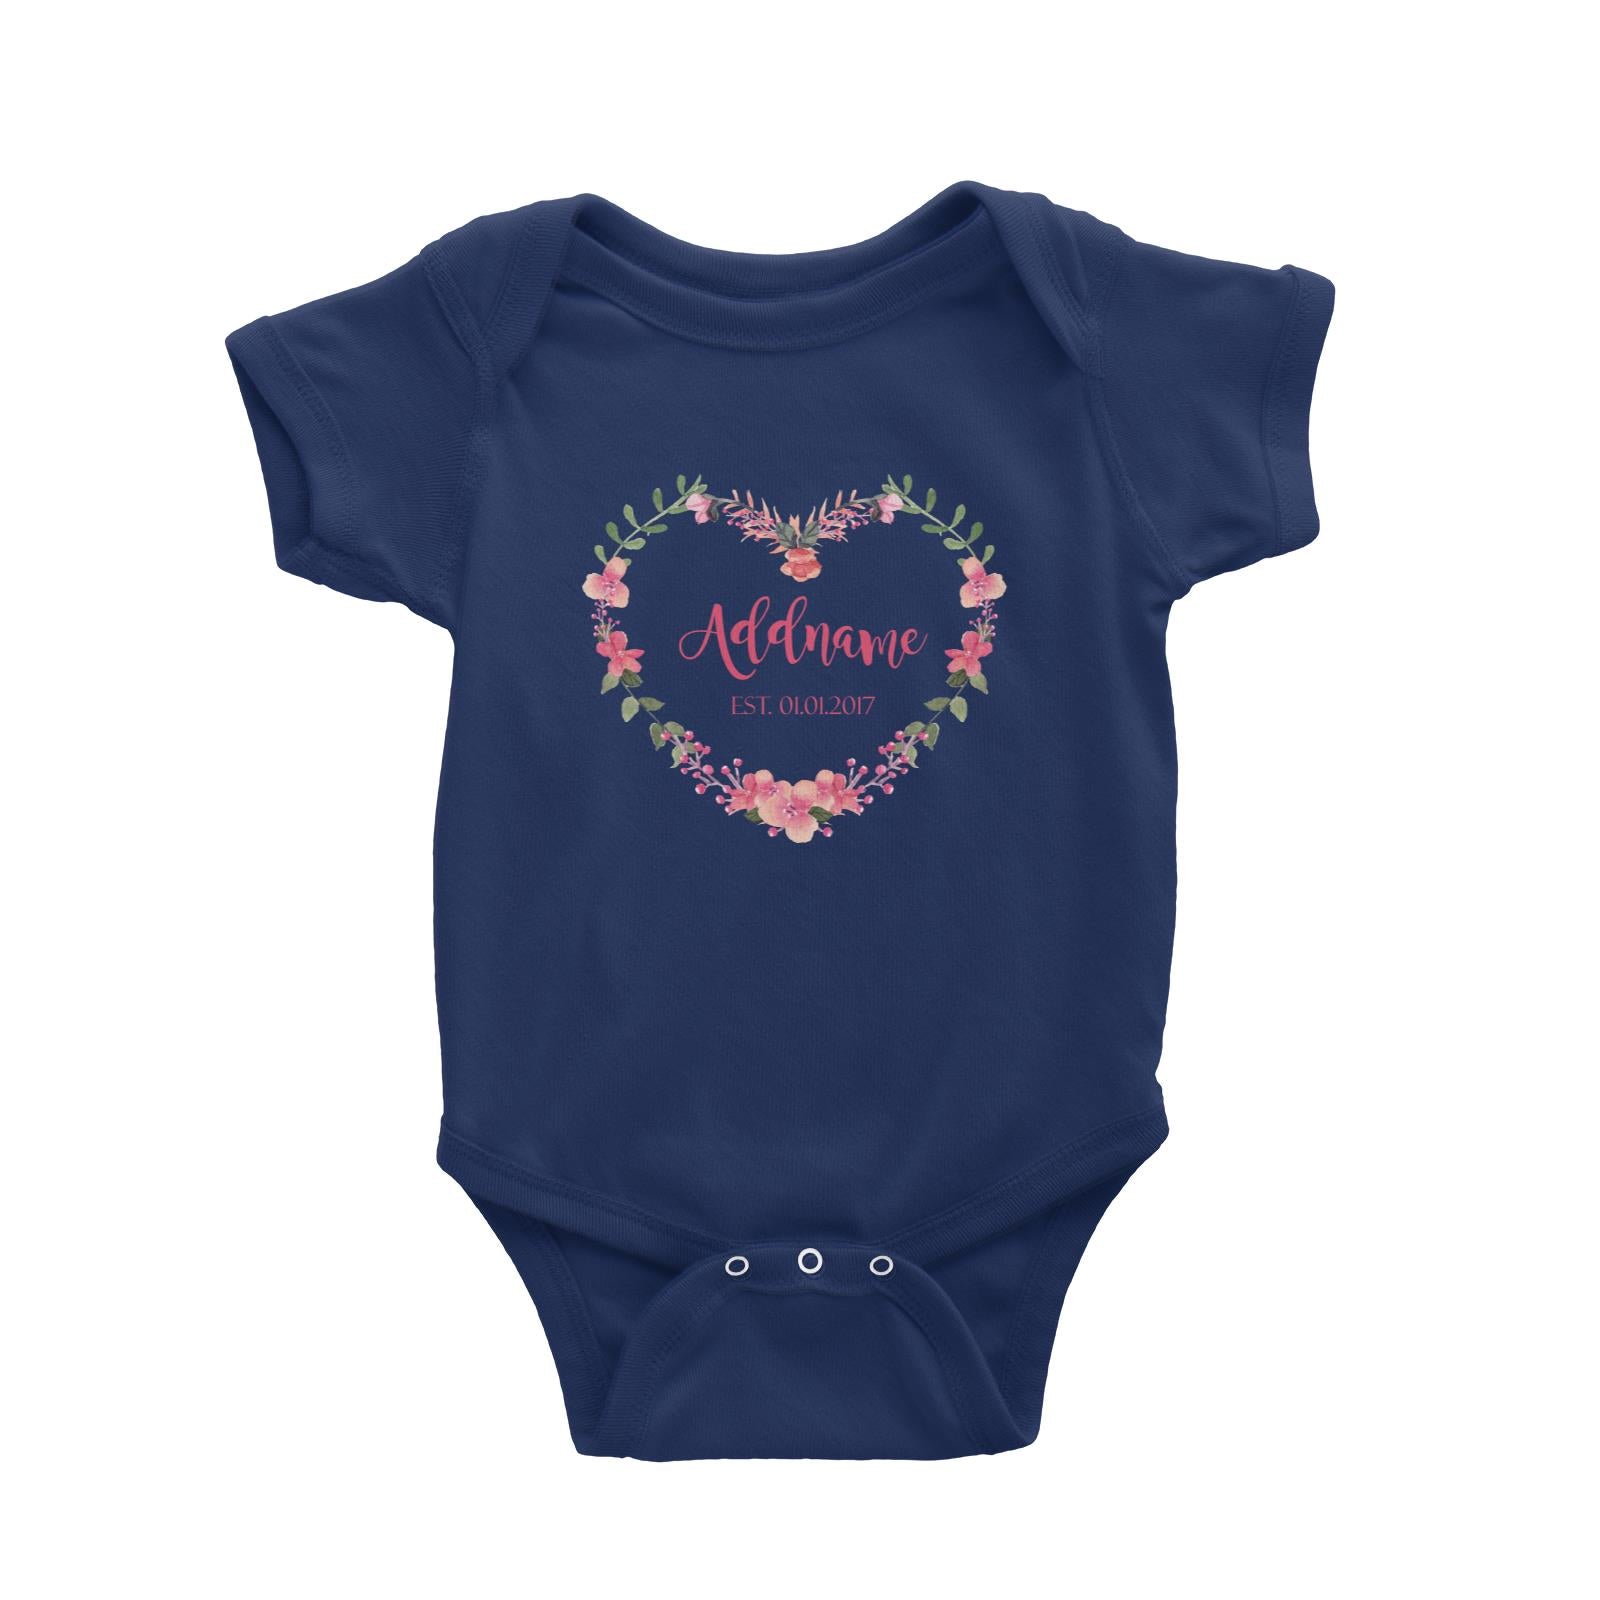 Add Name and Add Date in Pink Heart Shaped Flower Wreath Baby Romper